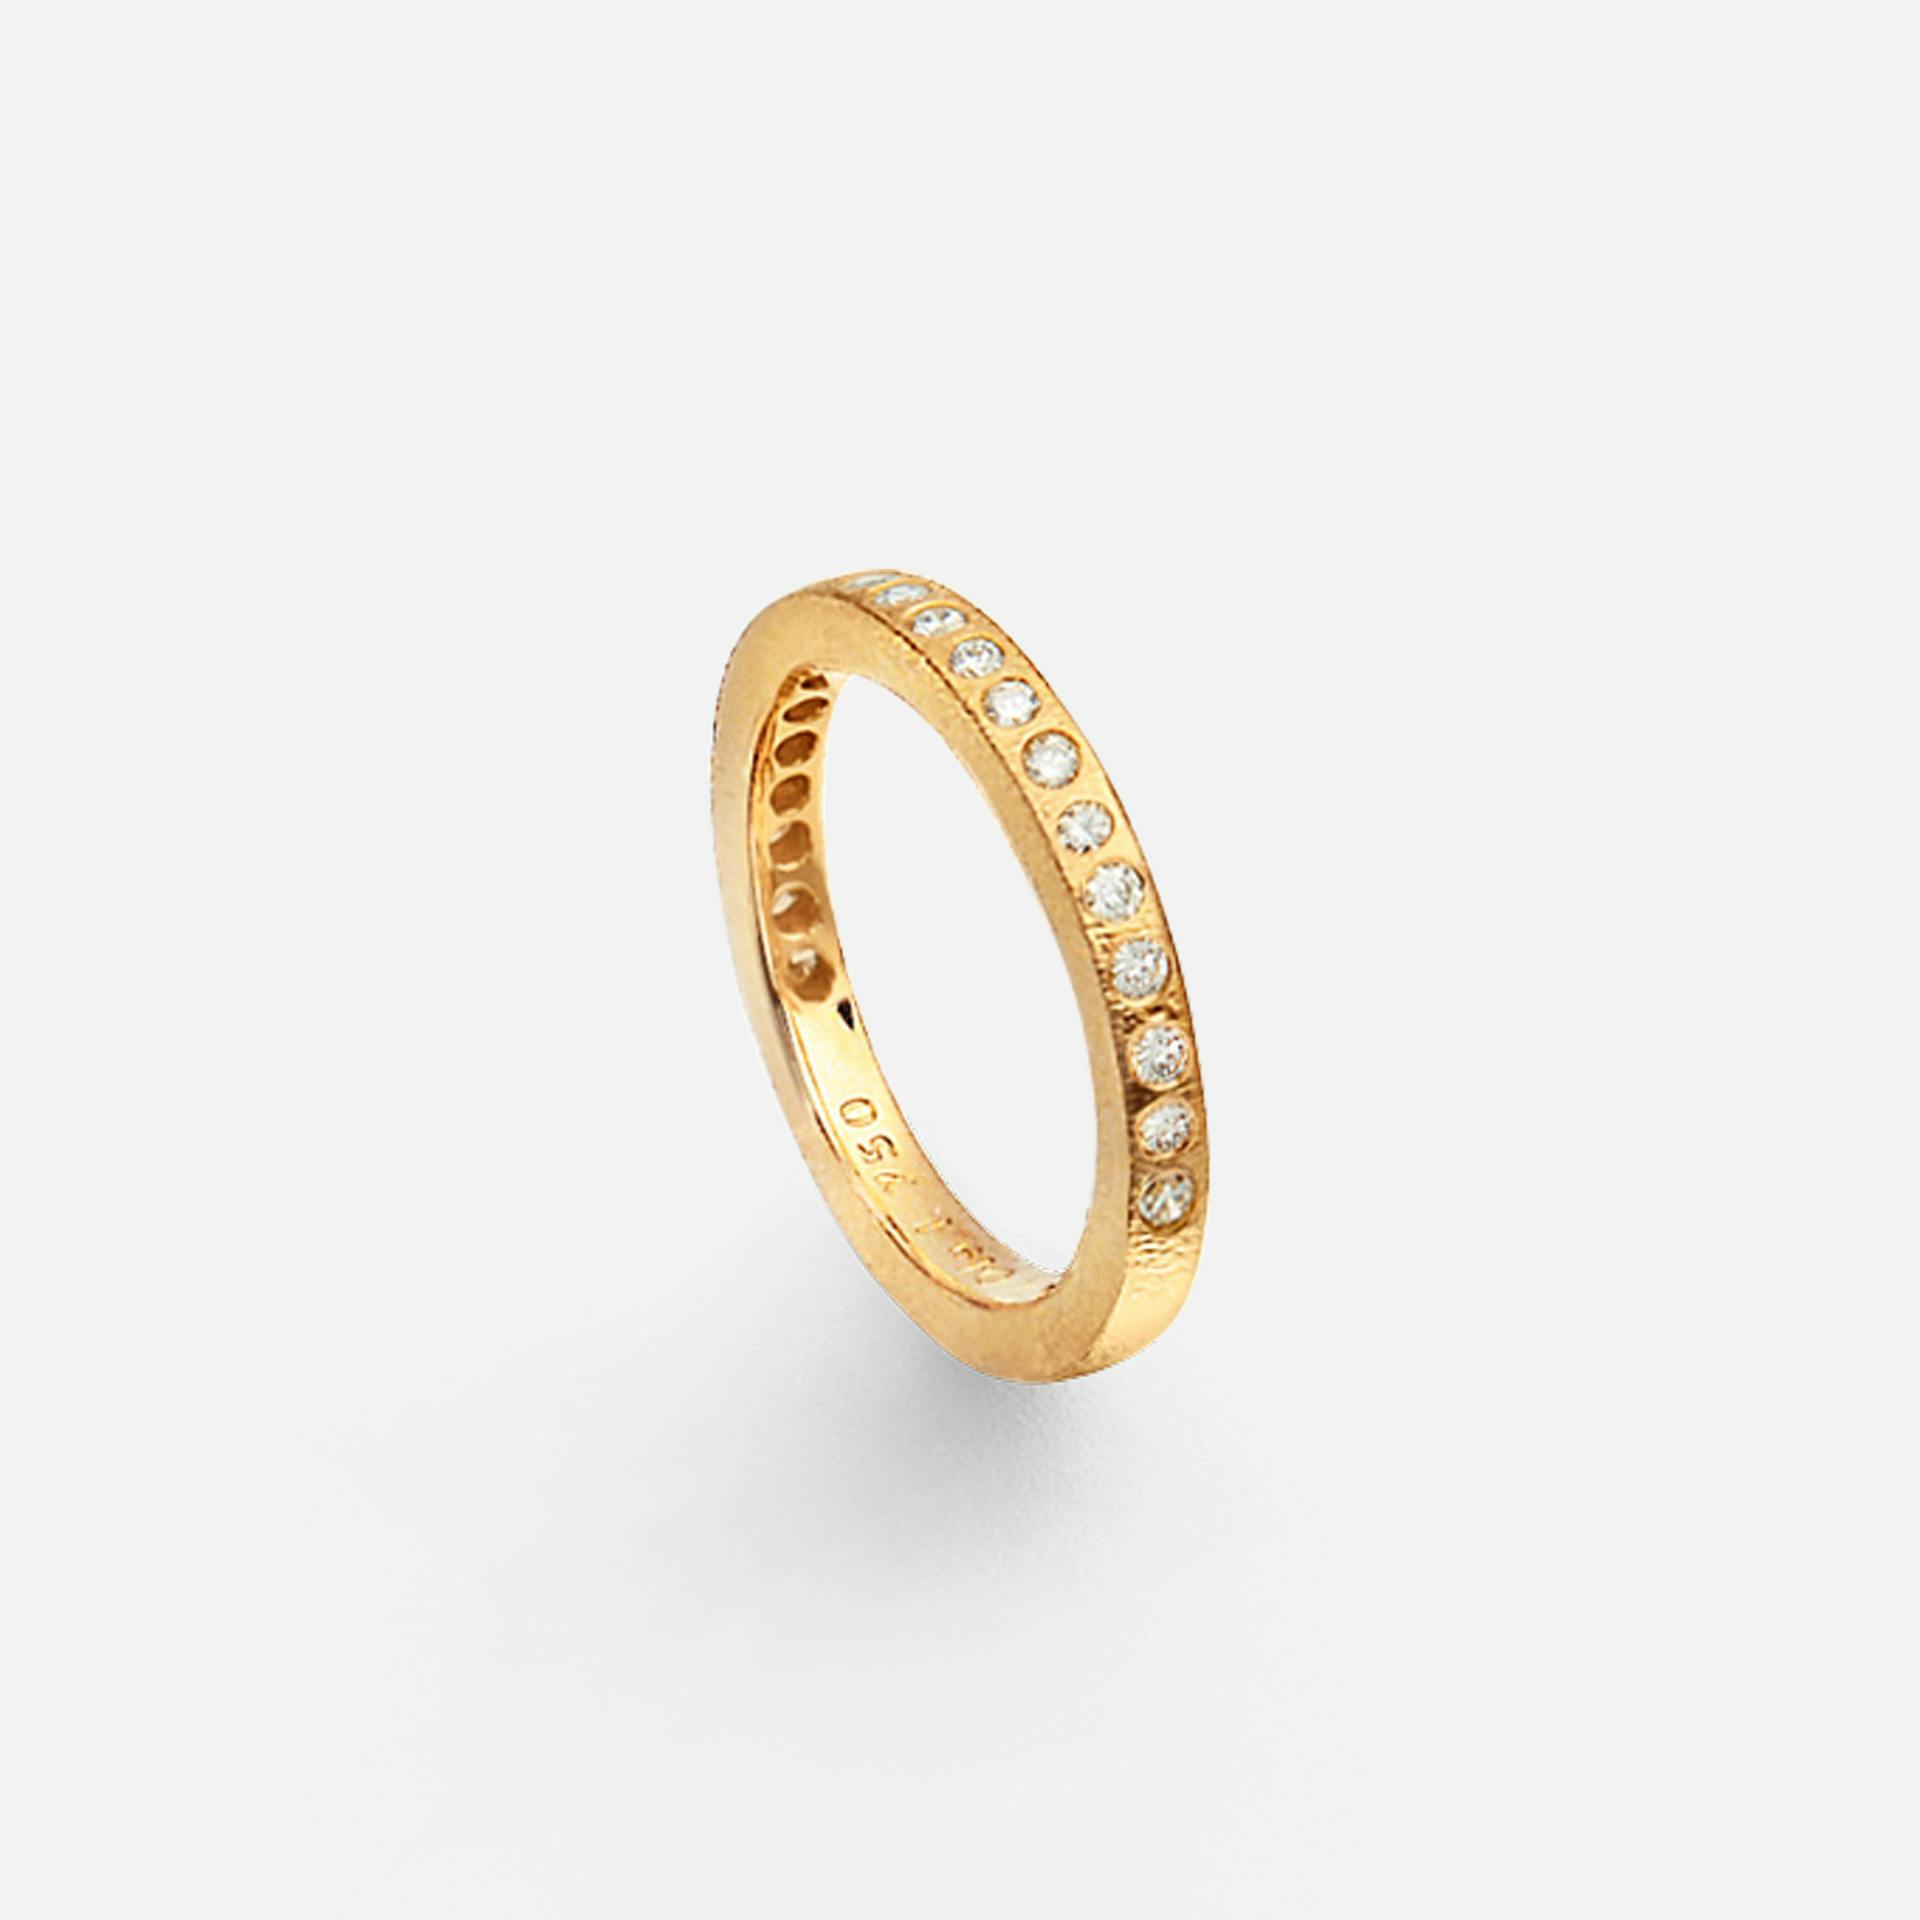 Forever Love ring 18k polished gold with diamonds 0.40-0.46 ct. TW. VS.